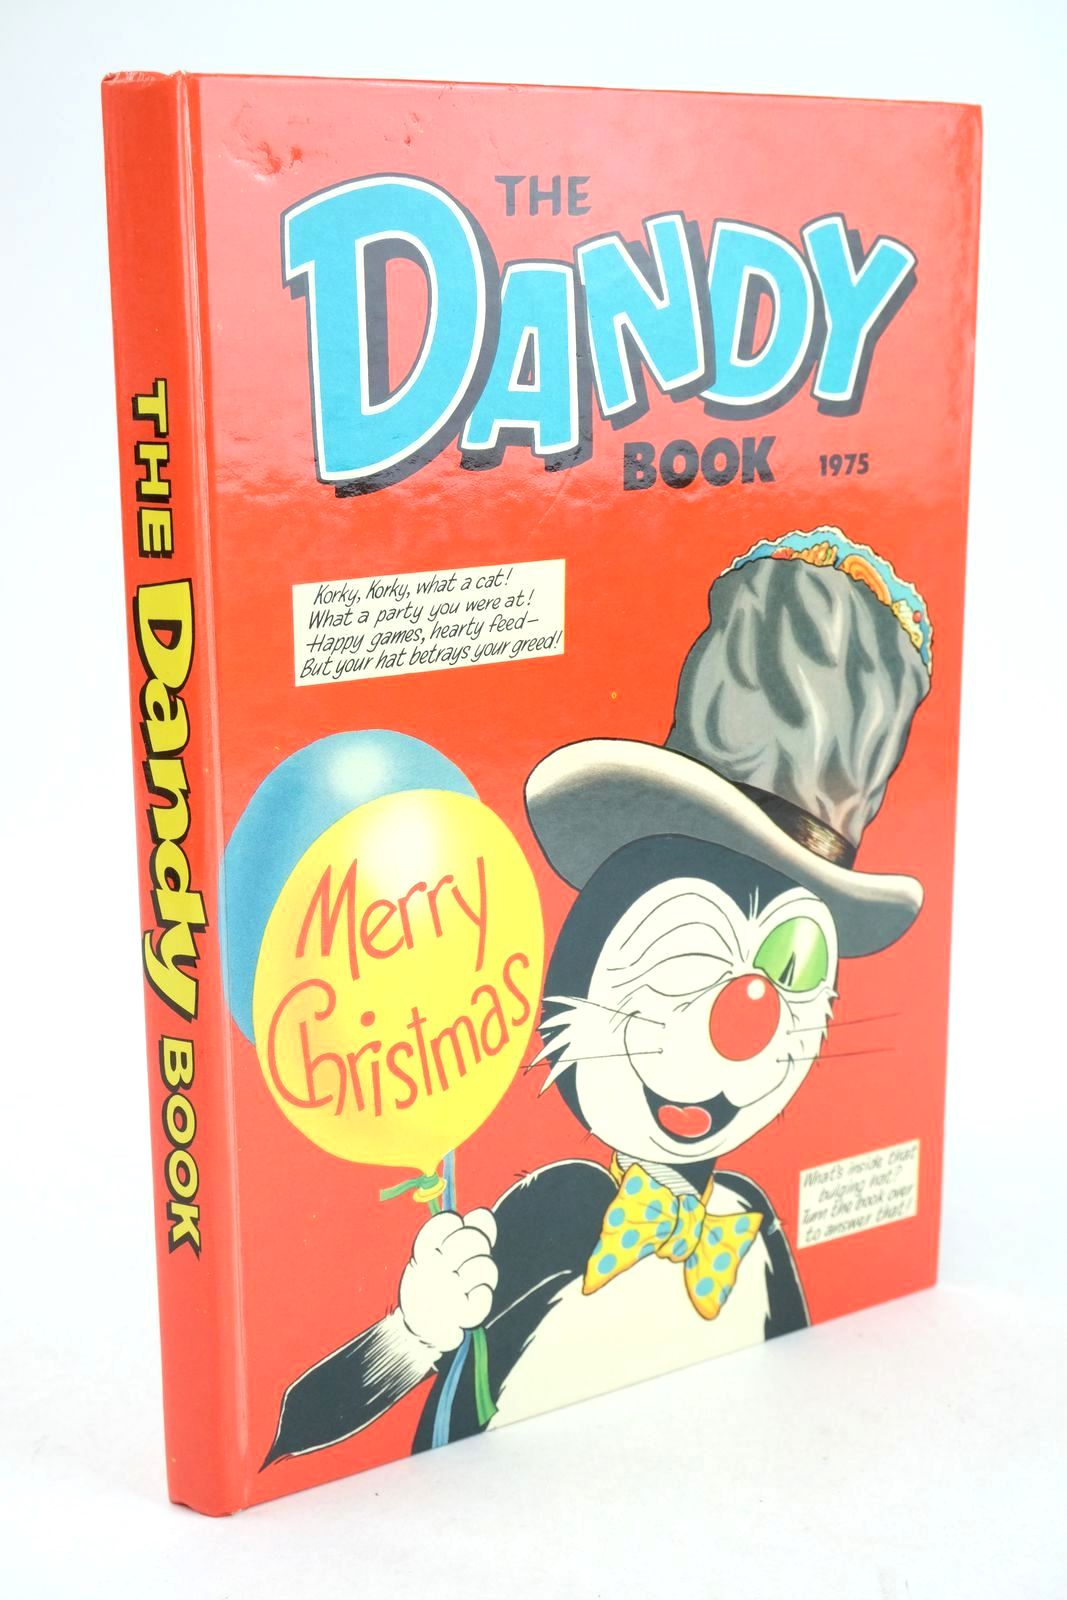 Photo of THE DANDY BOOK 1975 published by D.C. Thomson &amp; Co Ltd. (STOCK CODE: 1325628)  for sale by Stella & Rose's Books